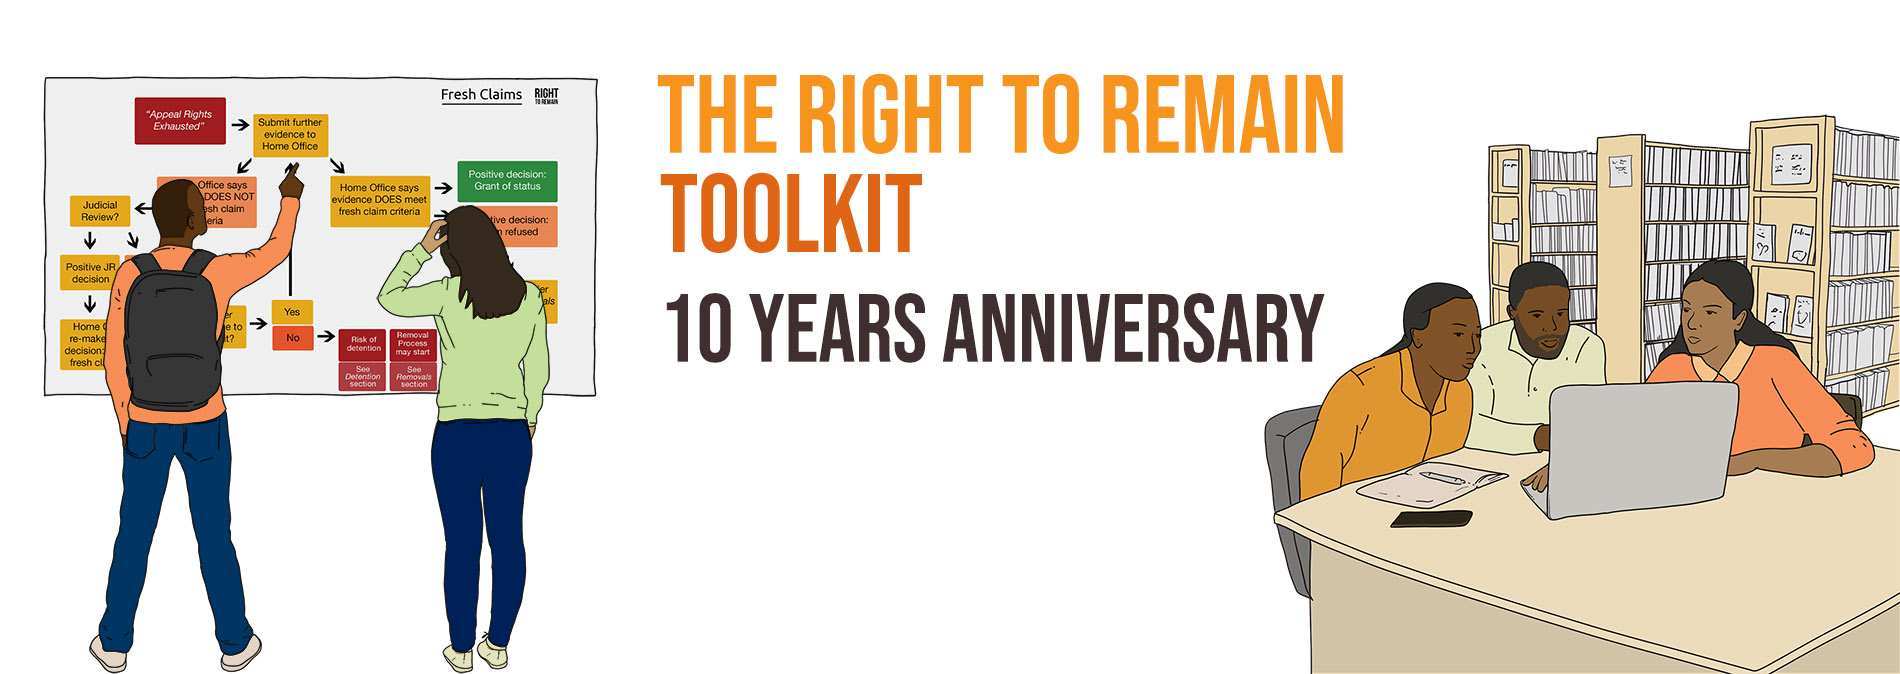 Right to Remain Toolkit Festival – Bradford